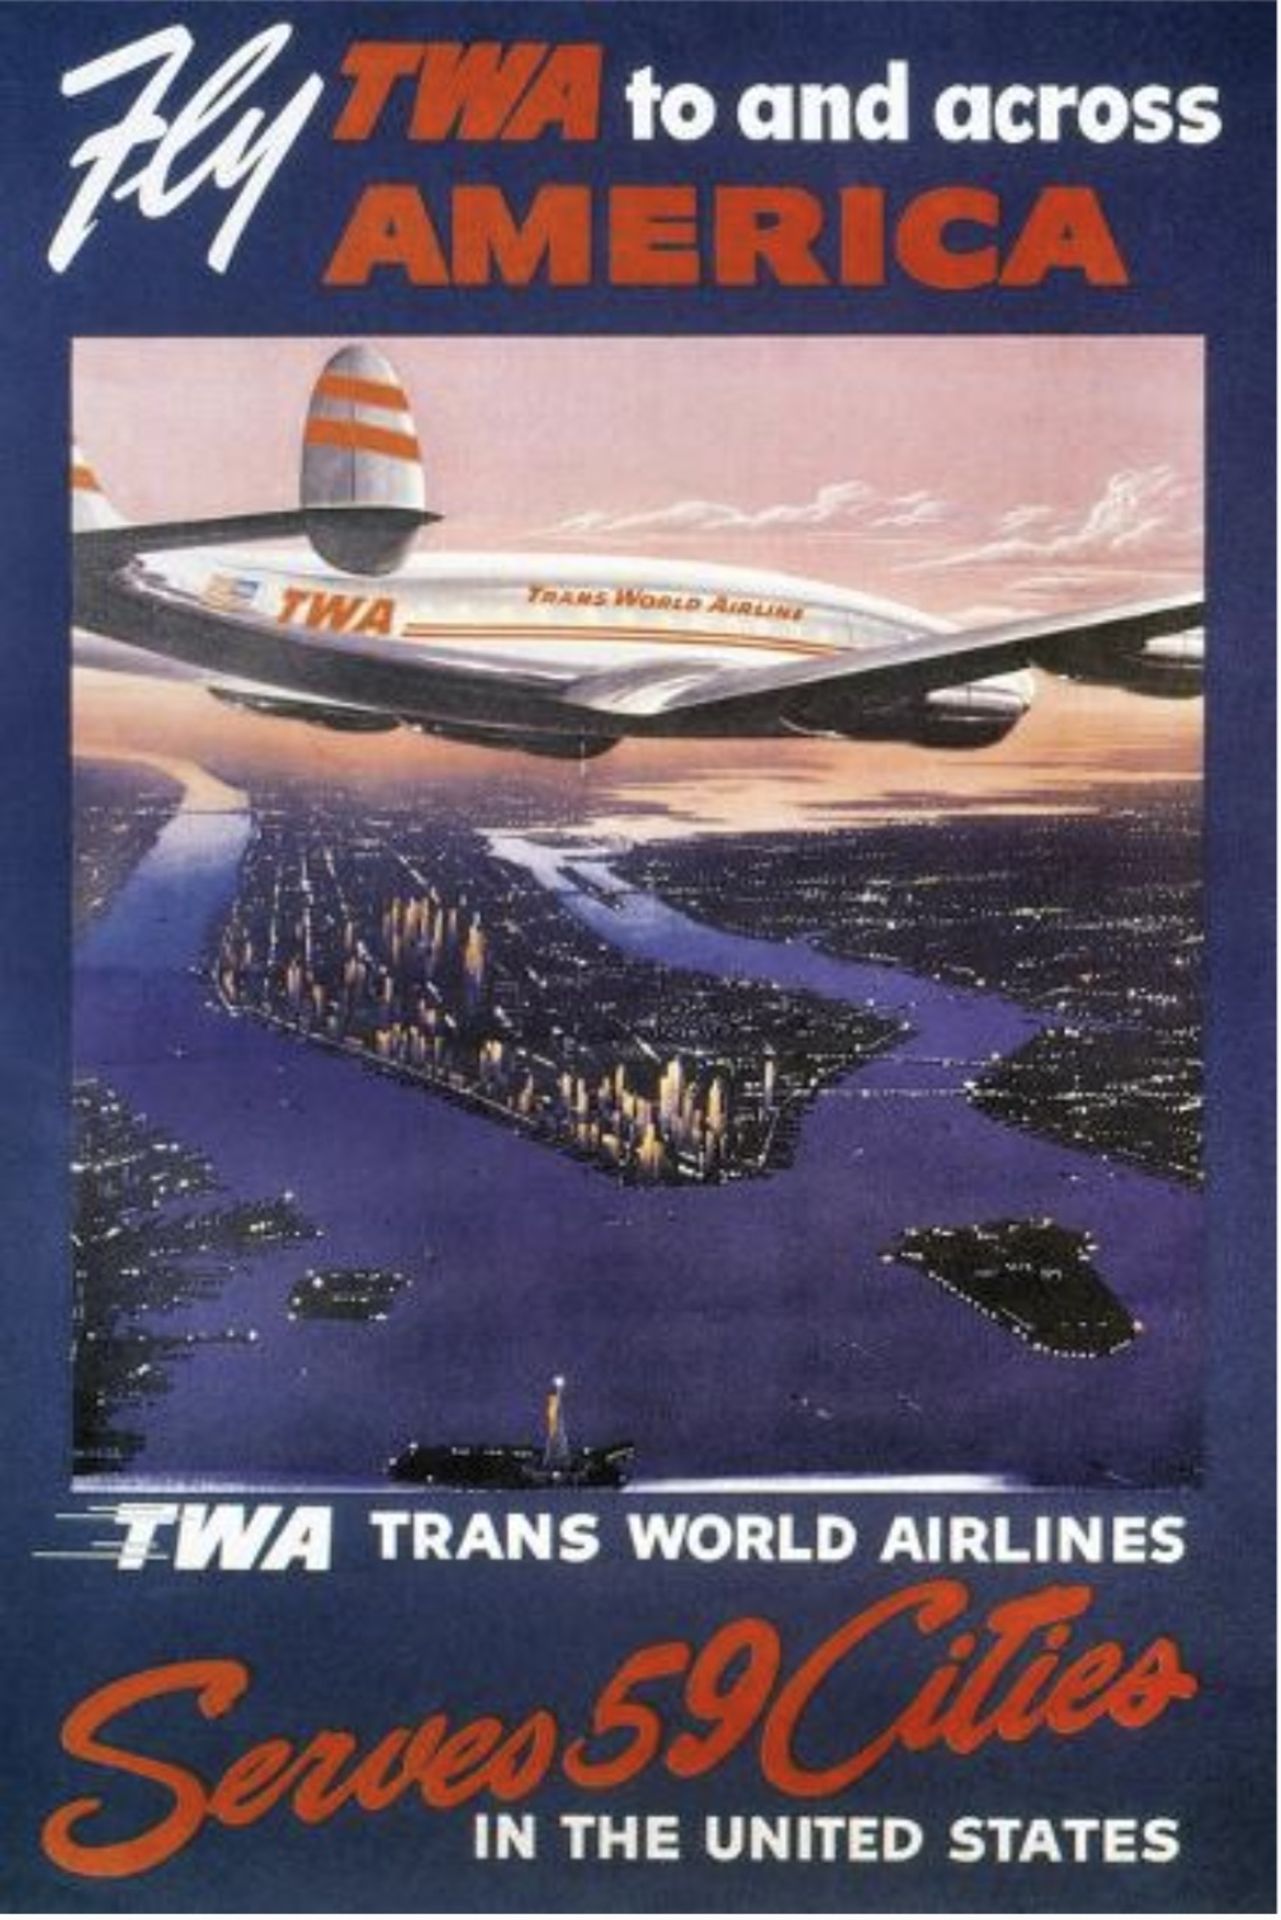 Trans World Airlines "America, New York" Poster